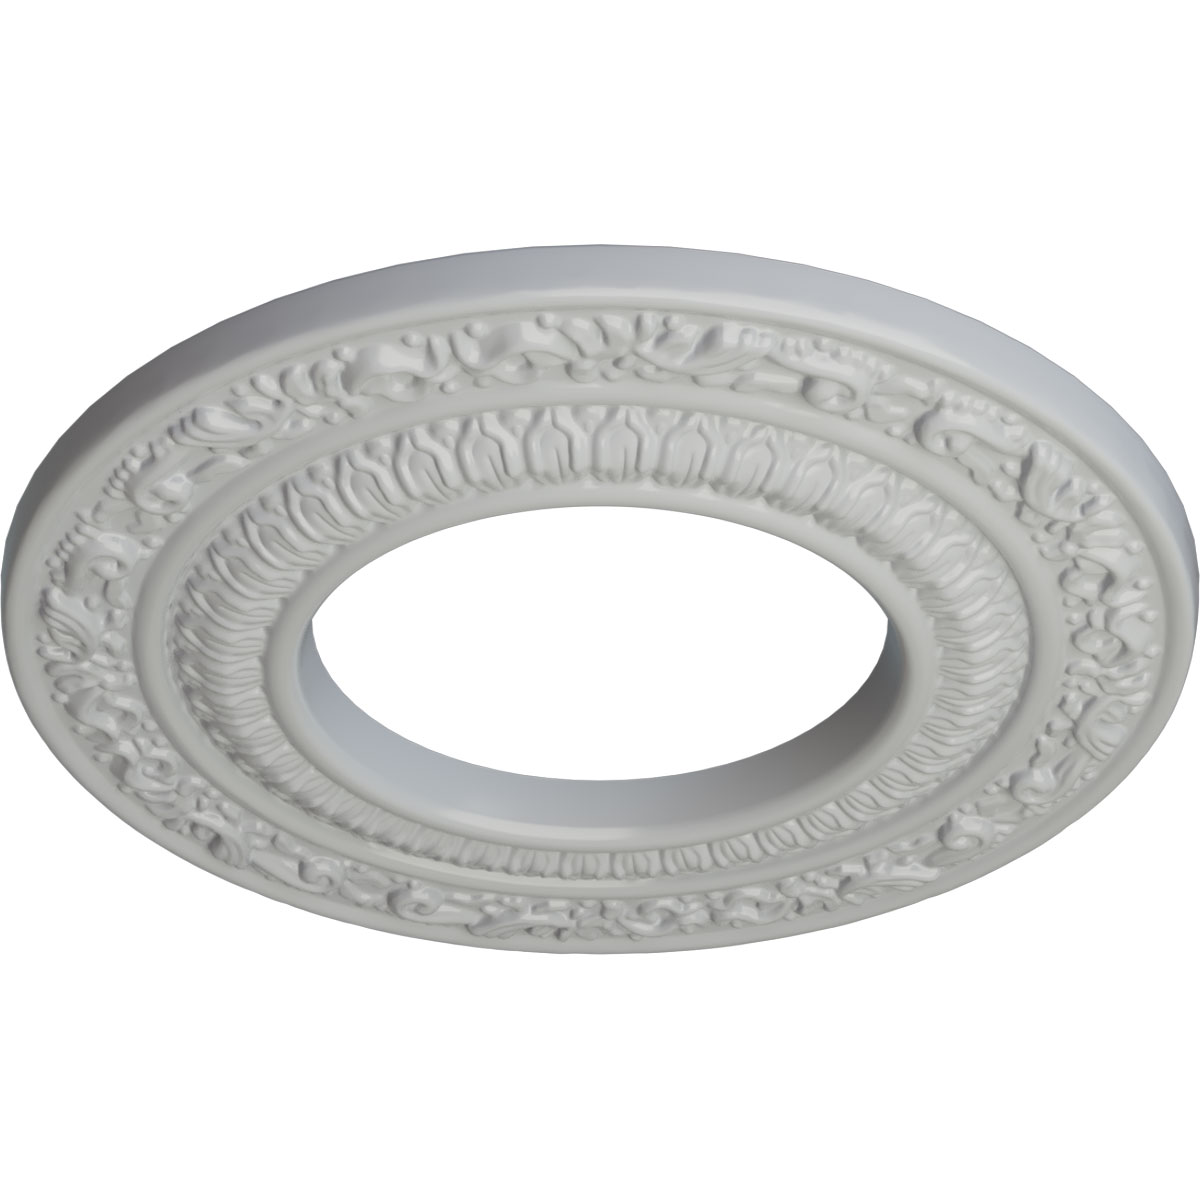 Ekena Millwork 8 1/8"OD x 4 1/8"ID x 1/2"P Andrea Ceiling Medallion (Fits Canopies up to 4 1/8"), Hand-Painted Frost - image 2 of 4